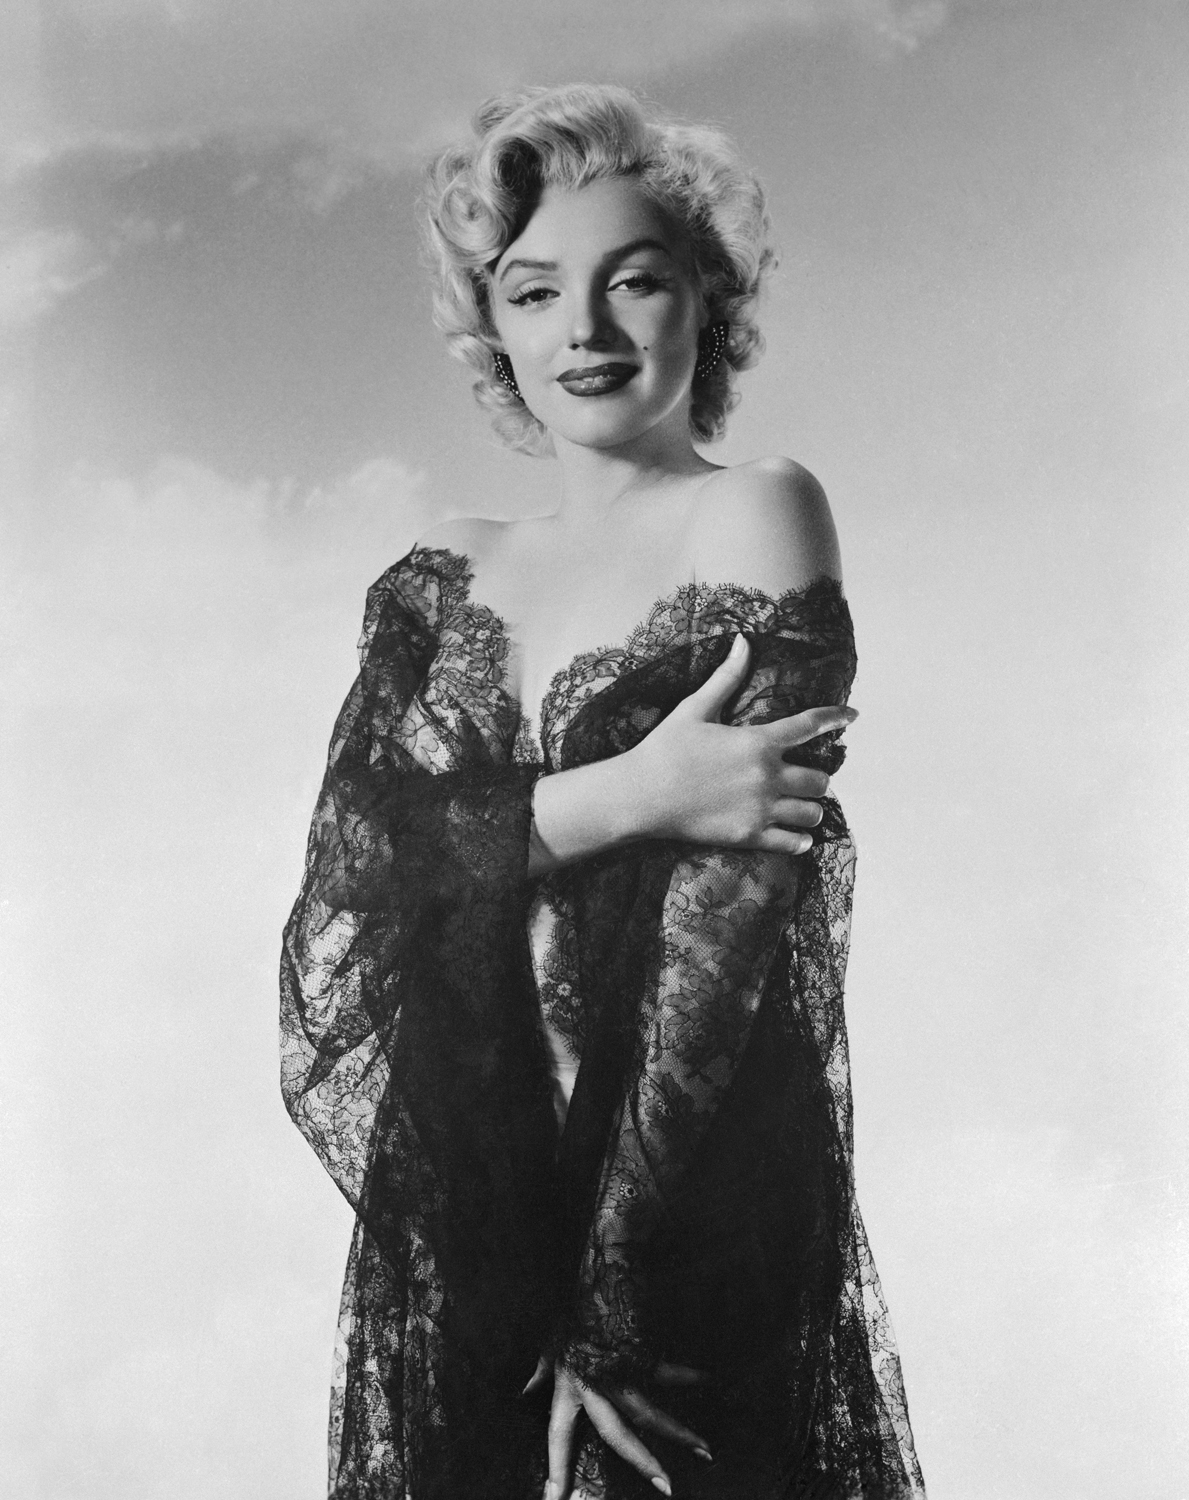 Monroe in a nightgown on Oct. 14, 1954.